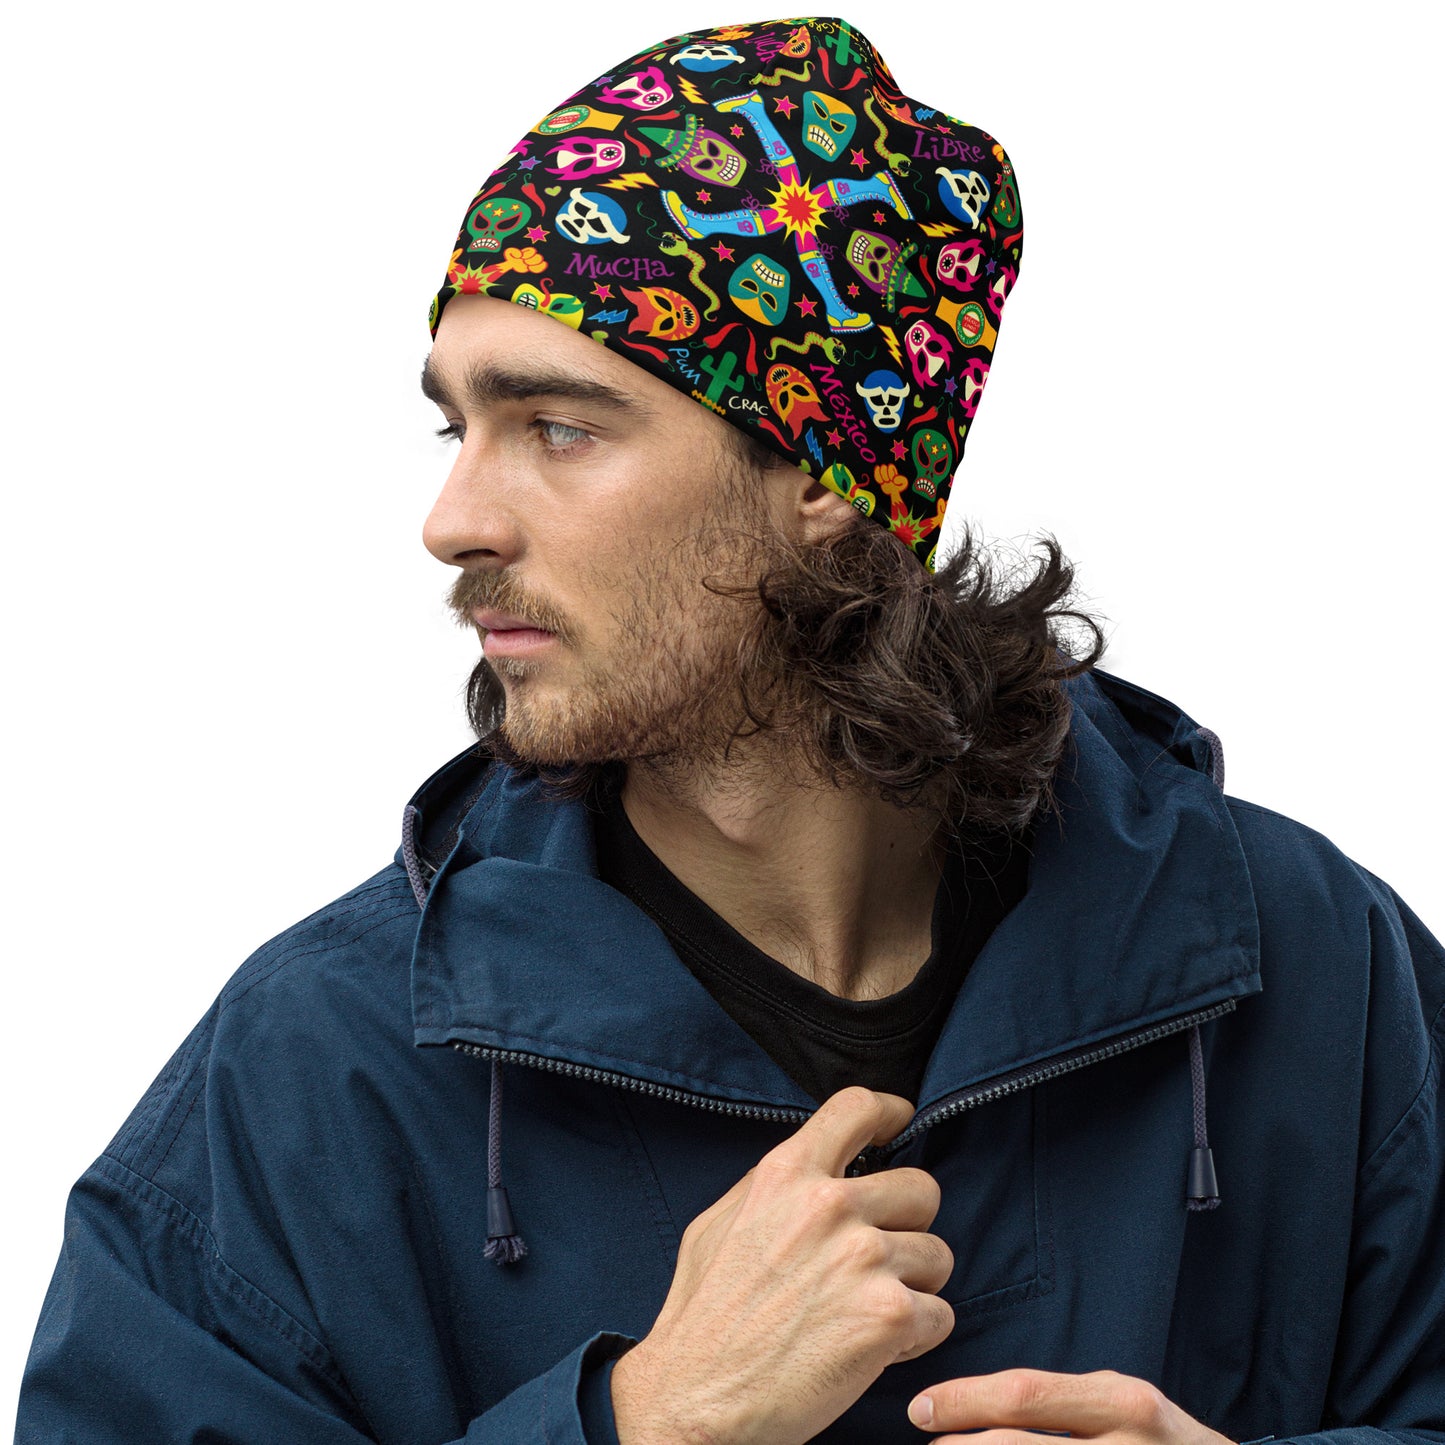 Mexican wrestling colorful party All-Over Print Beanie. Side view